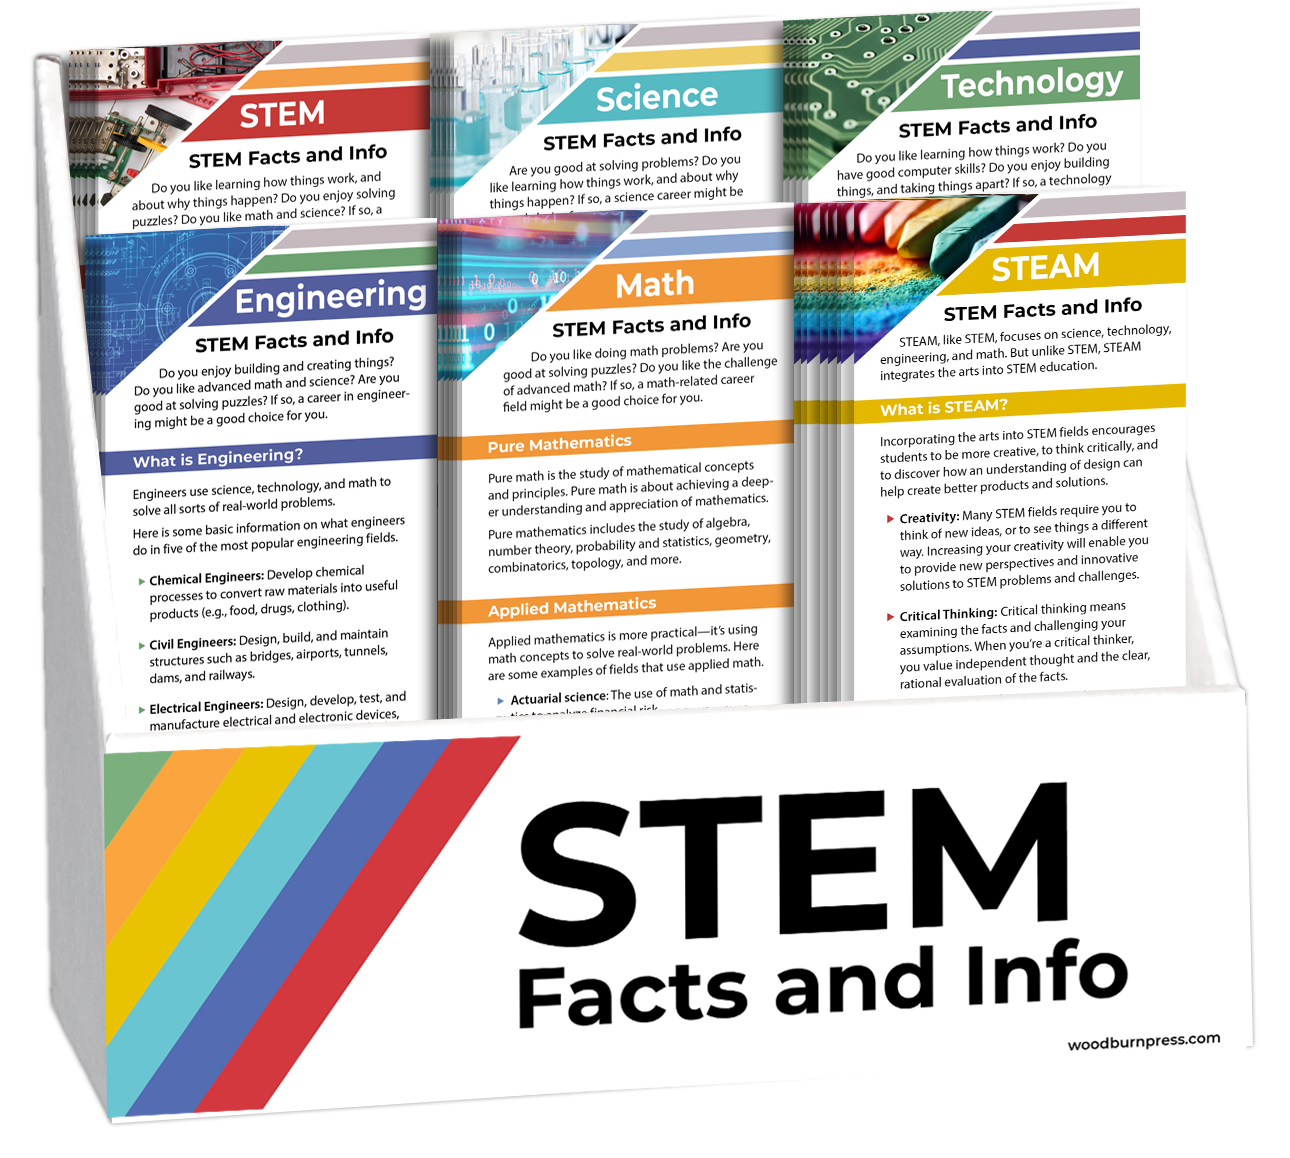 STEM - Facts and Info Rack Card Display Package